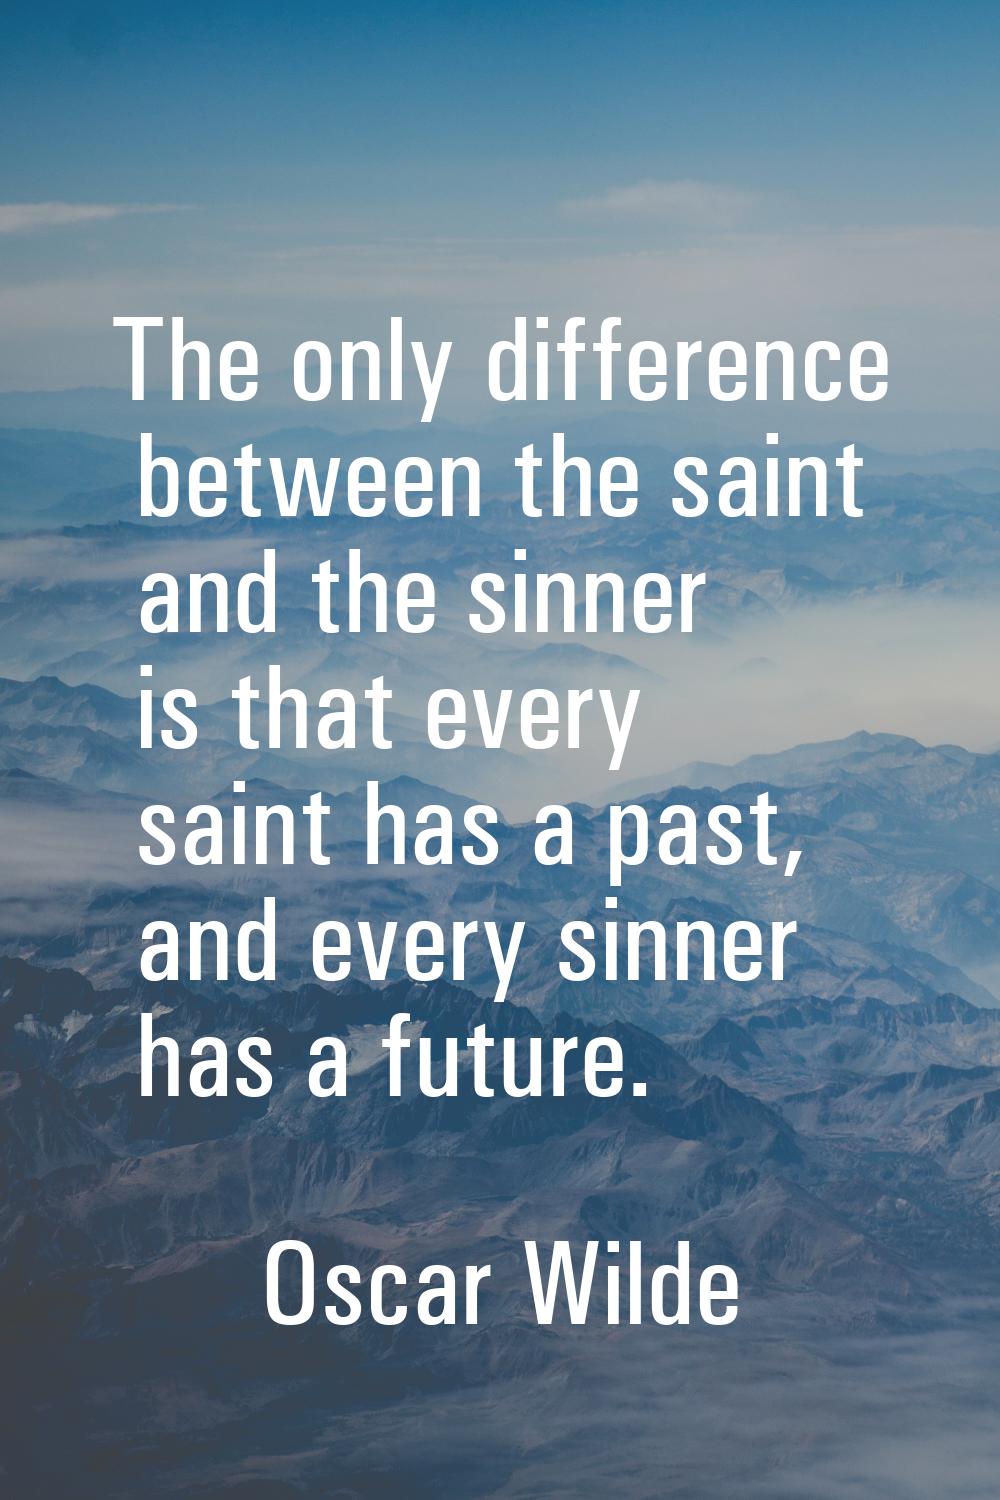 The only difference between the saint and the sinner is that every saint has a past, and every sinn